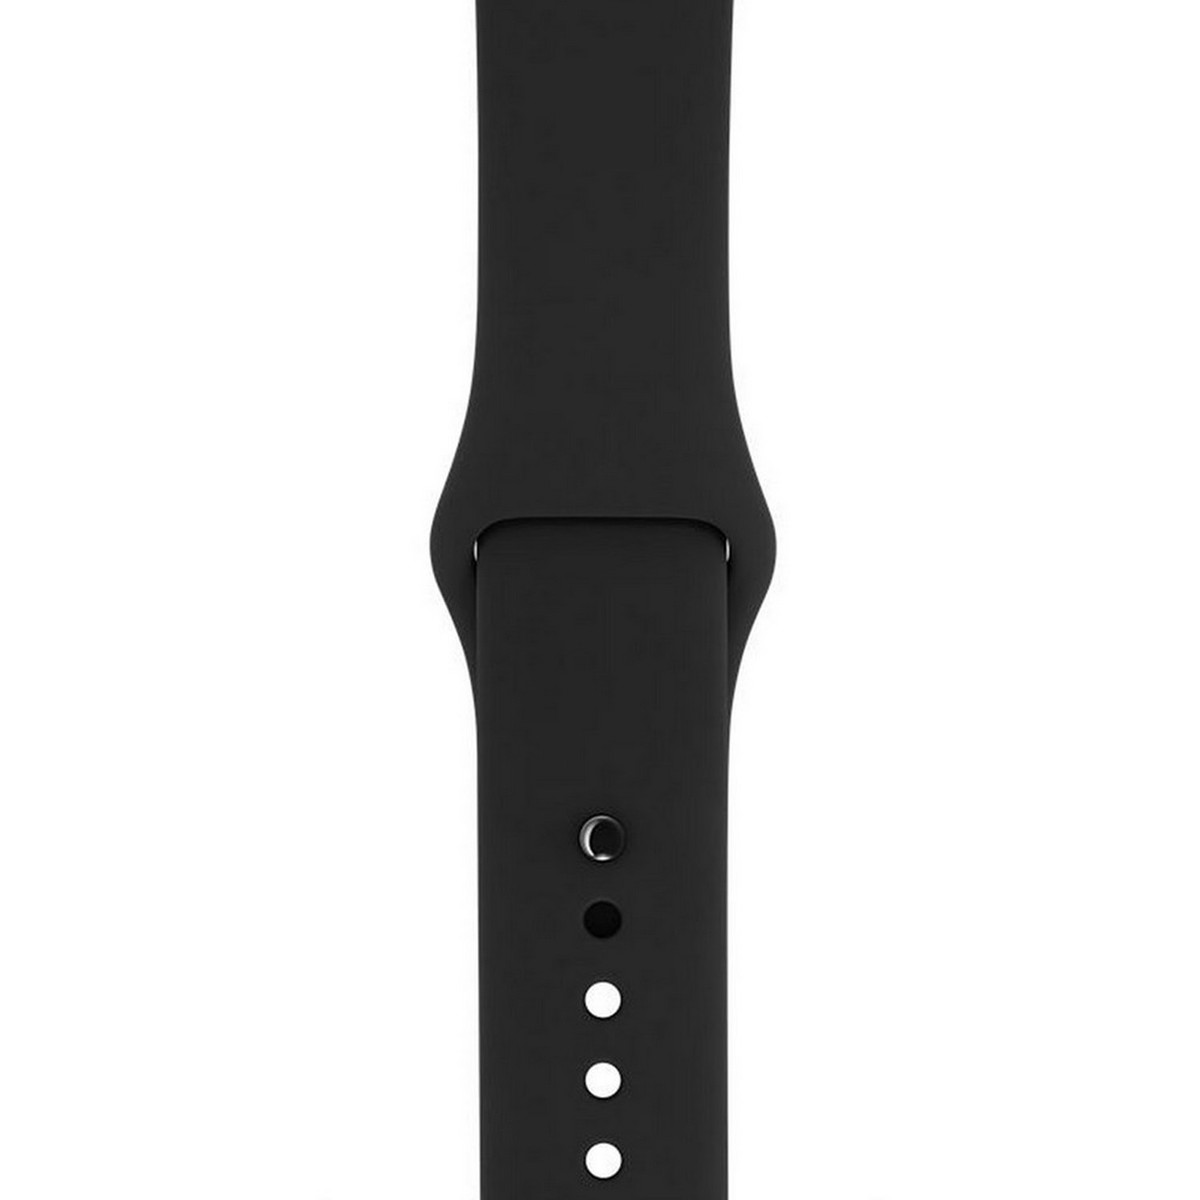 Apple Watch Series 1 MP022 38mm Space Gray Aluminum Case With Black Sport Band